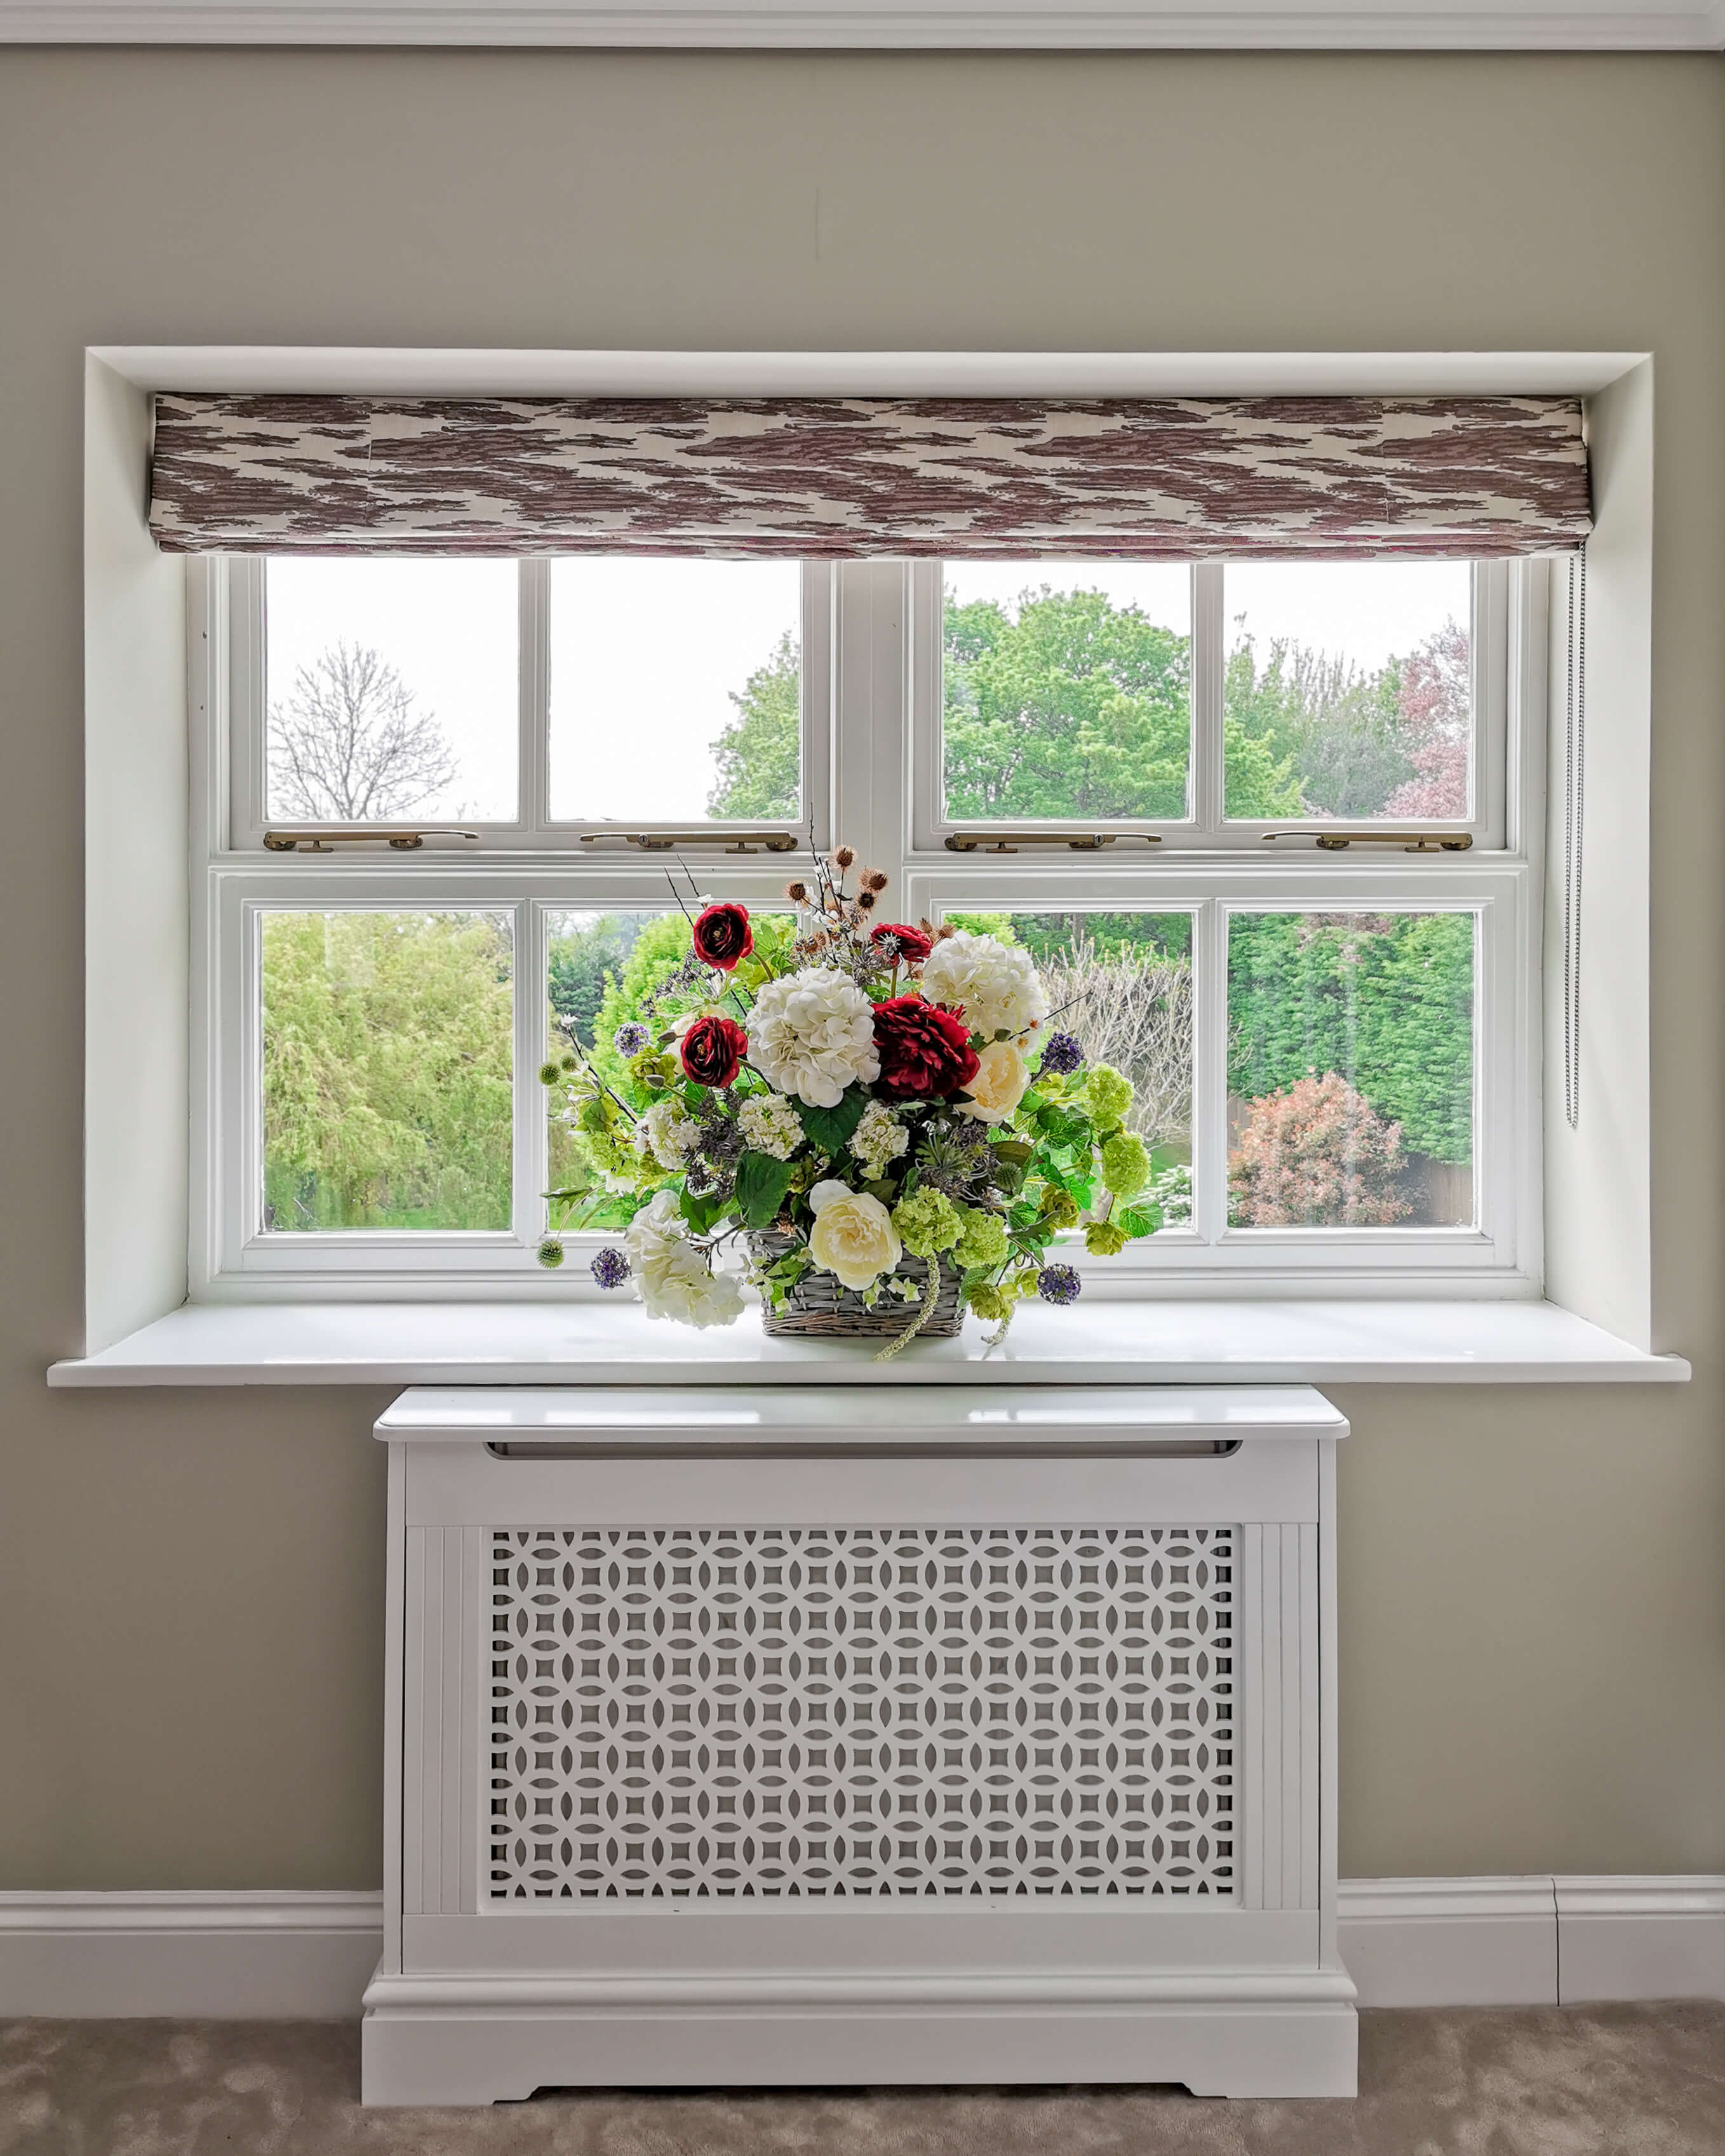 Patterned roman blind and flowers